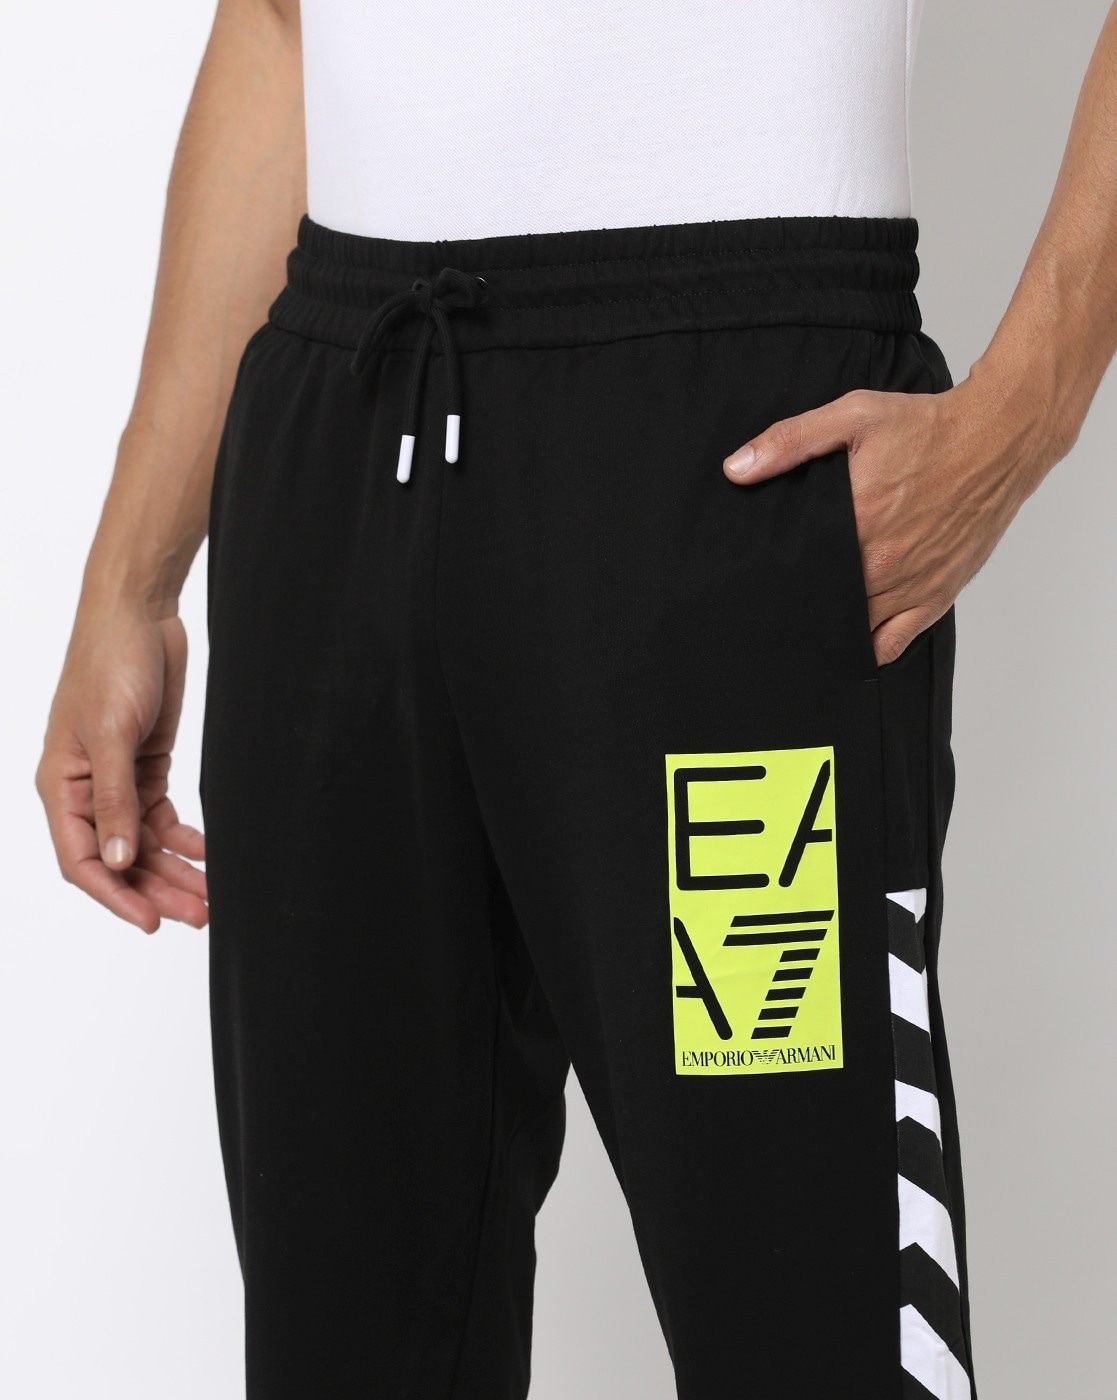 Racing Equipment Pants Old Armanisa Jeans Leisure Sports Fashion Pants   China Jogging Suit and Plain Tracksuit price  MadeinChinacom